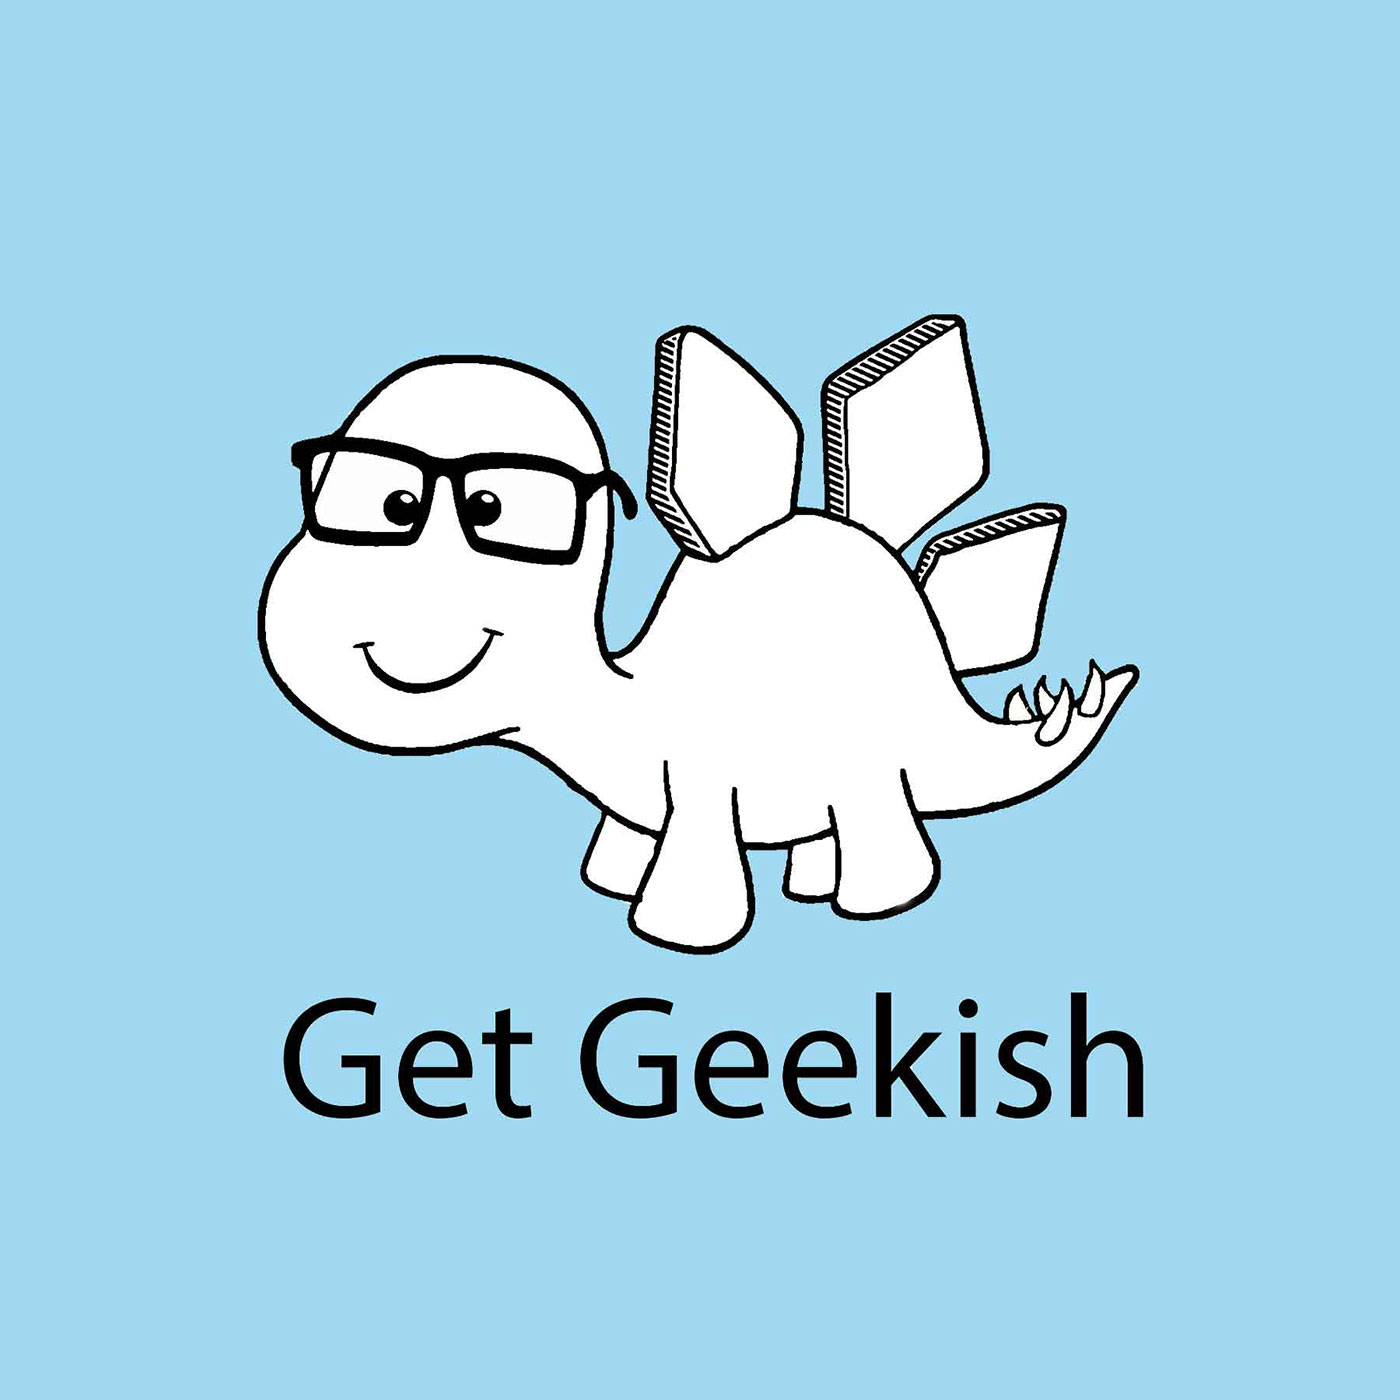 Are eSports Real Sports? - Get Geekish - Episode 25, August 8, 2018